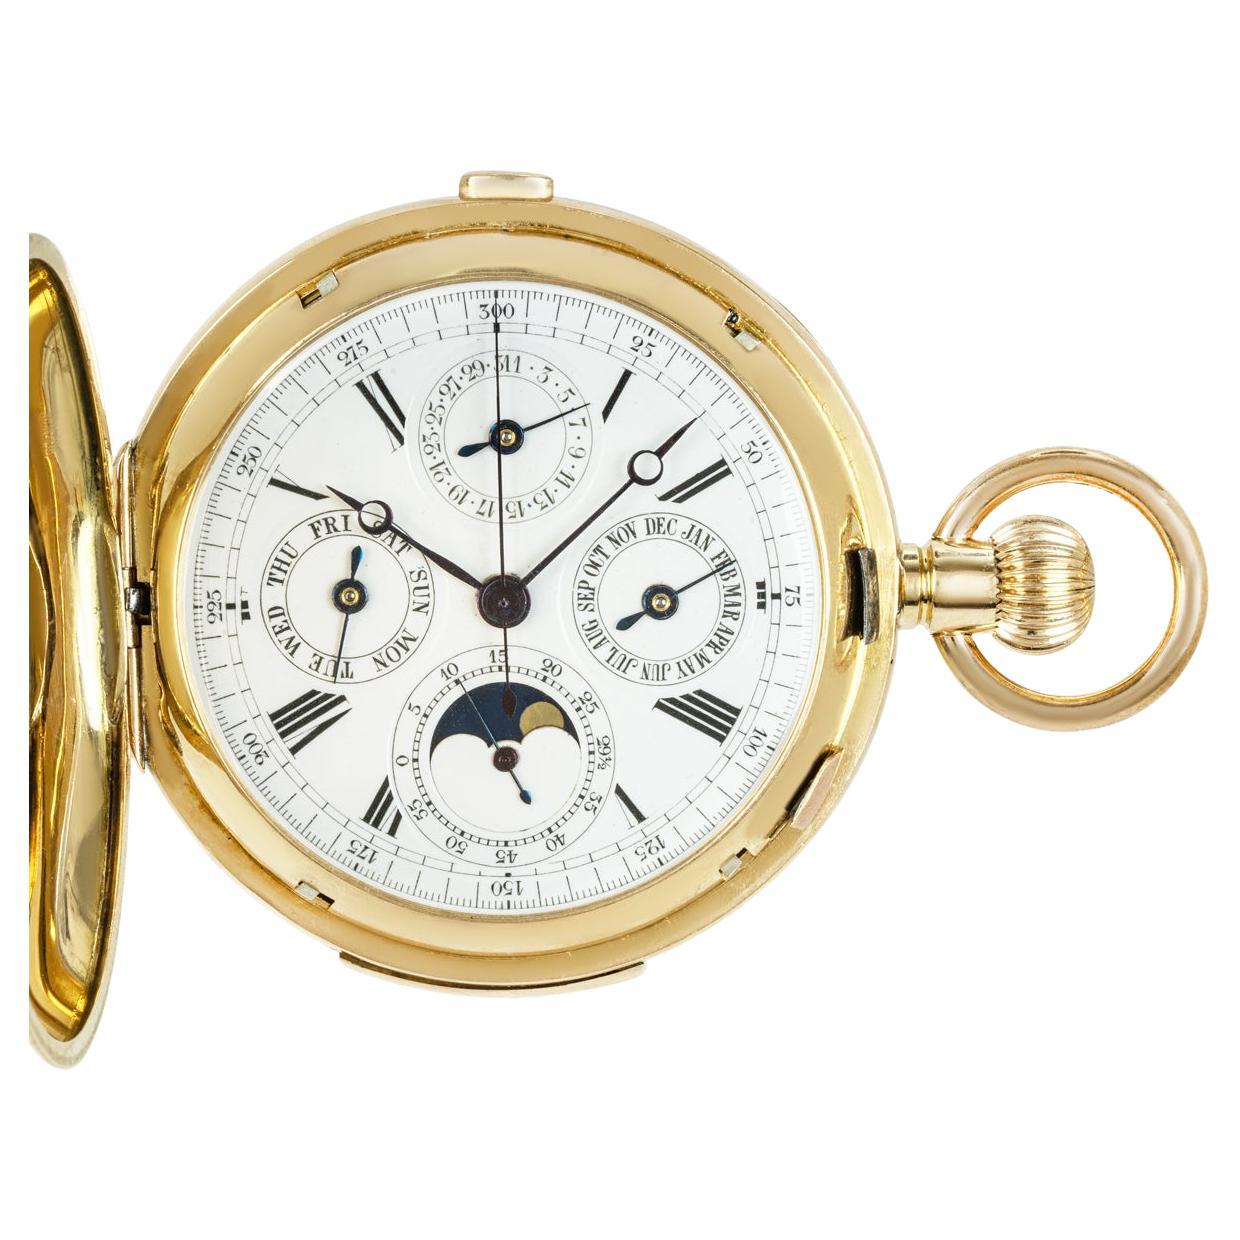 A Gold Minute Repeater Calendar Chronograph Hunter Pocket Watch C1890s